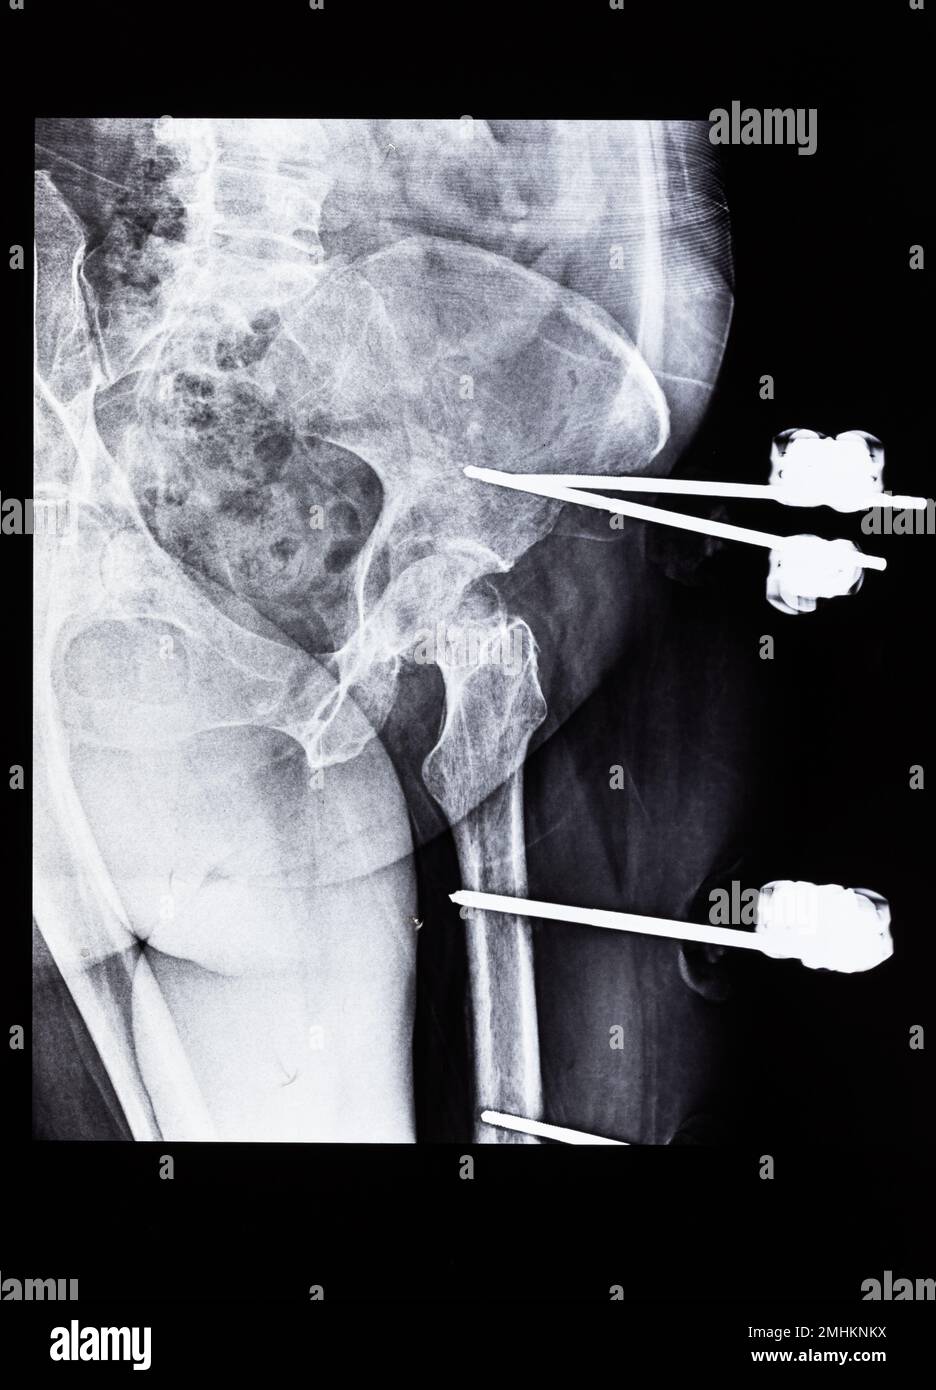 x-ray with external fixation device fixed in femur and pelvic bones Stock Photo